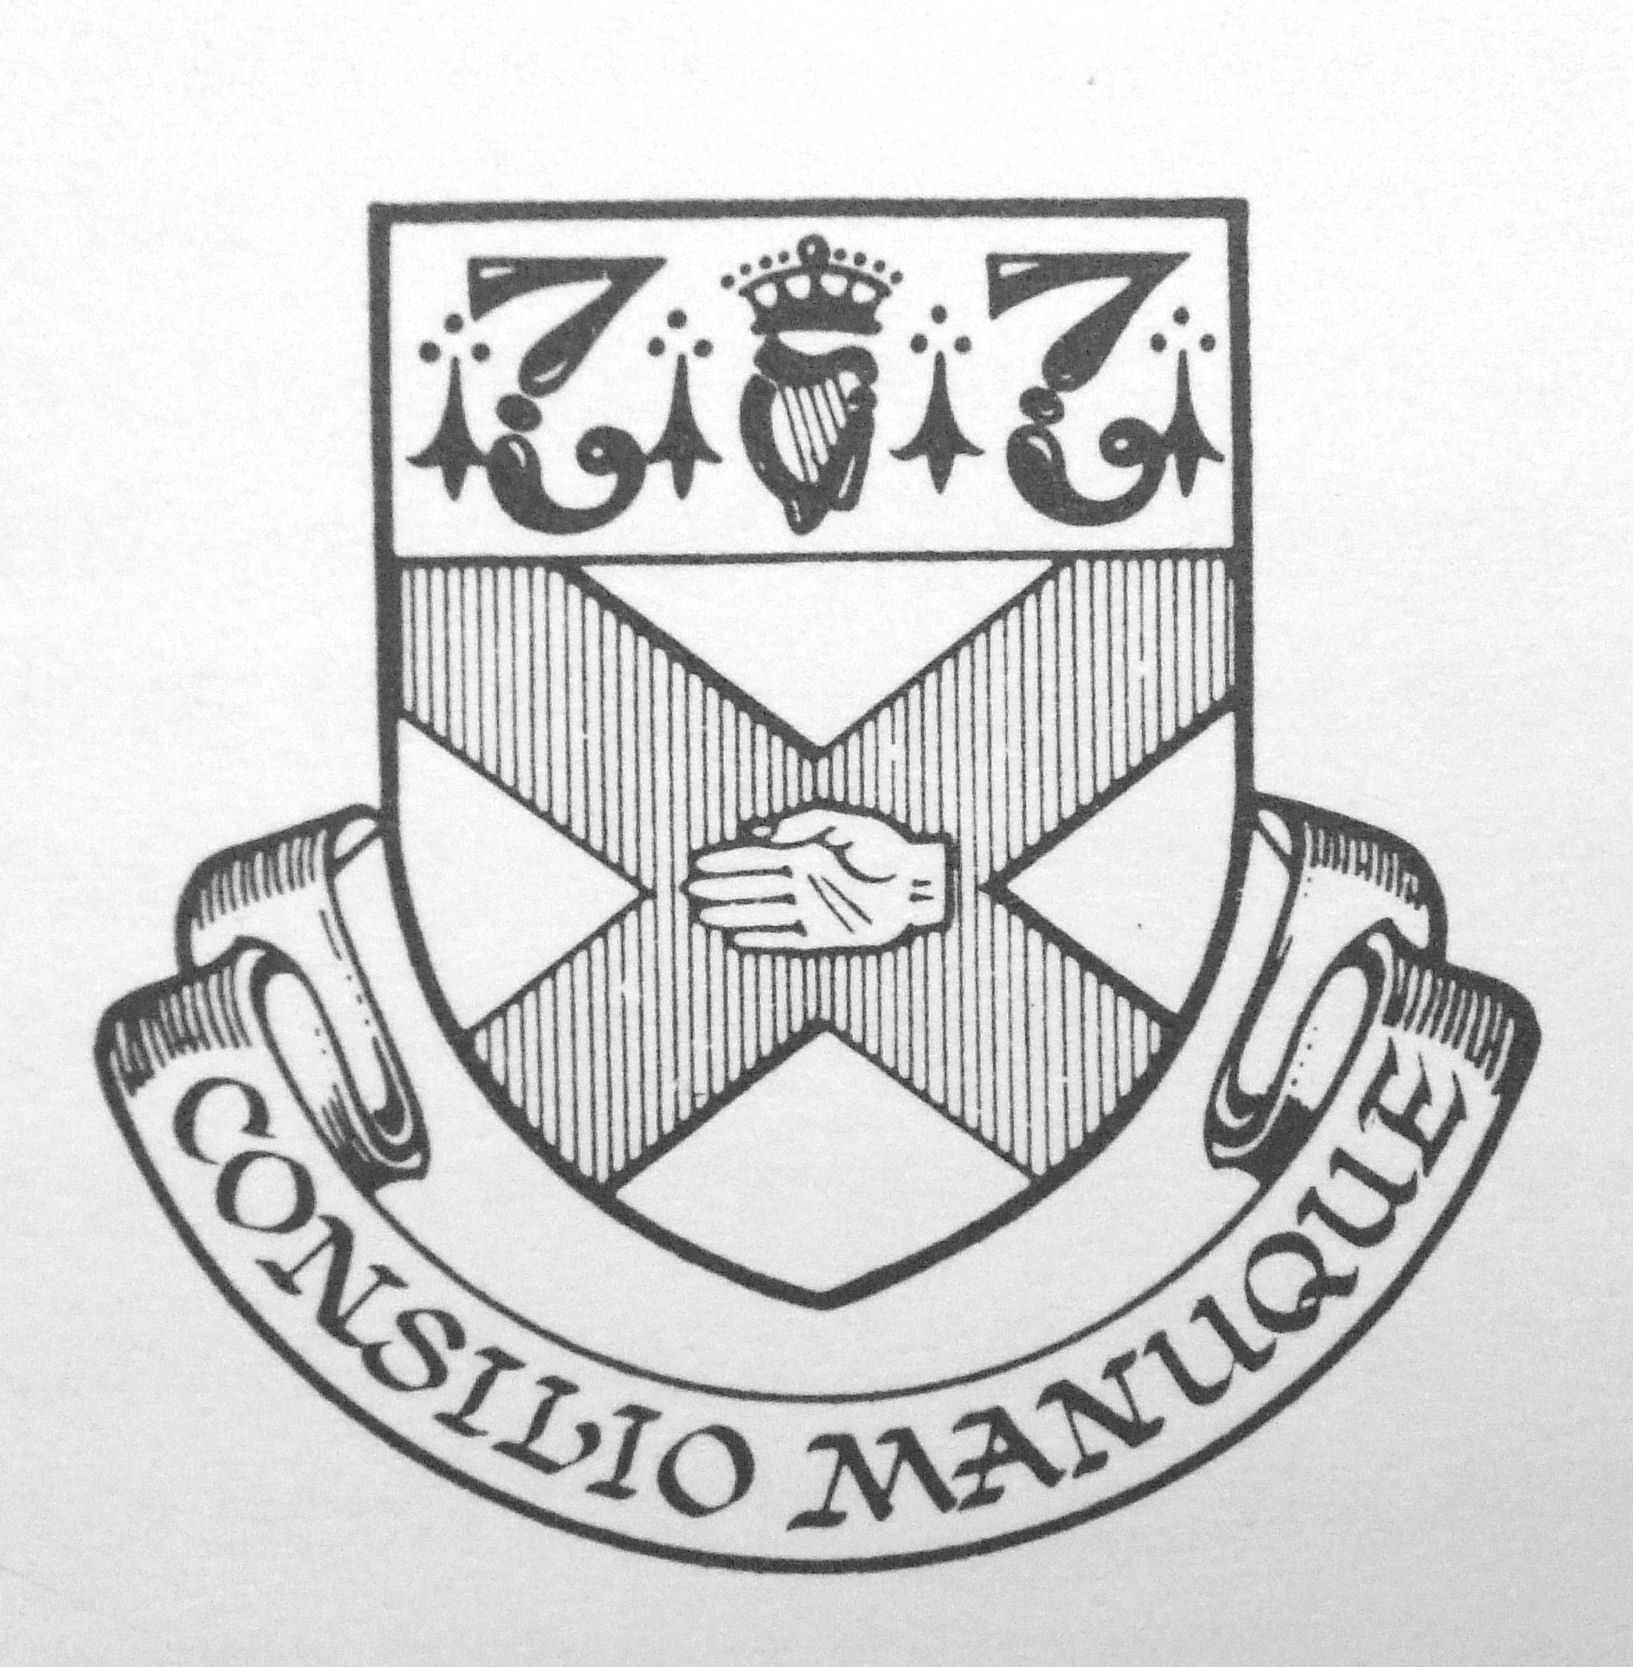 Arms of the Royal College of Surgeons in Ireland, 1907